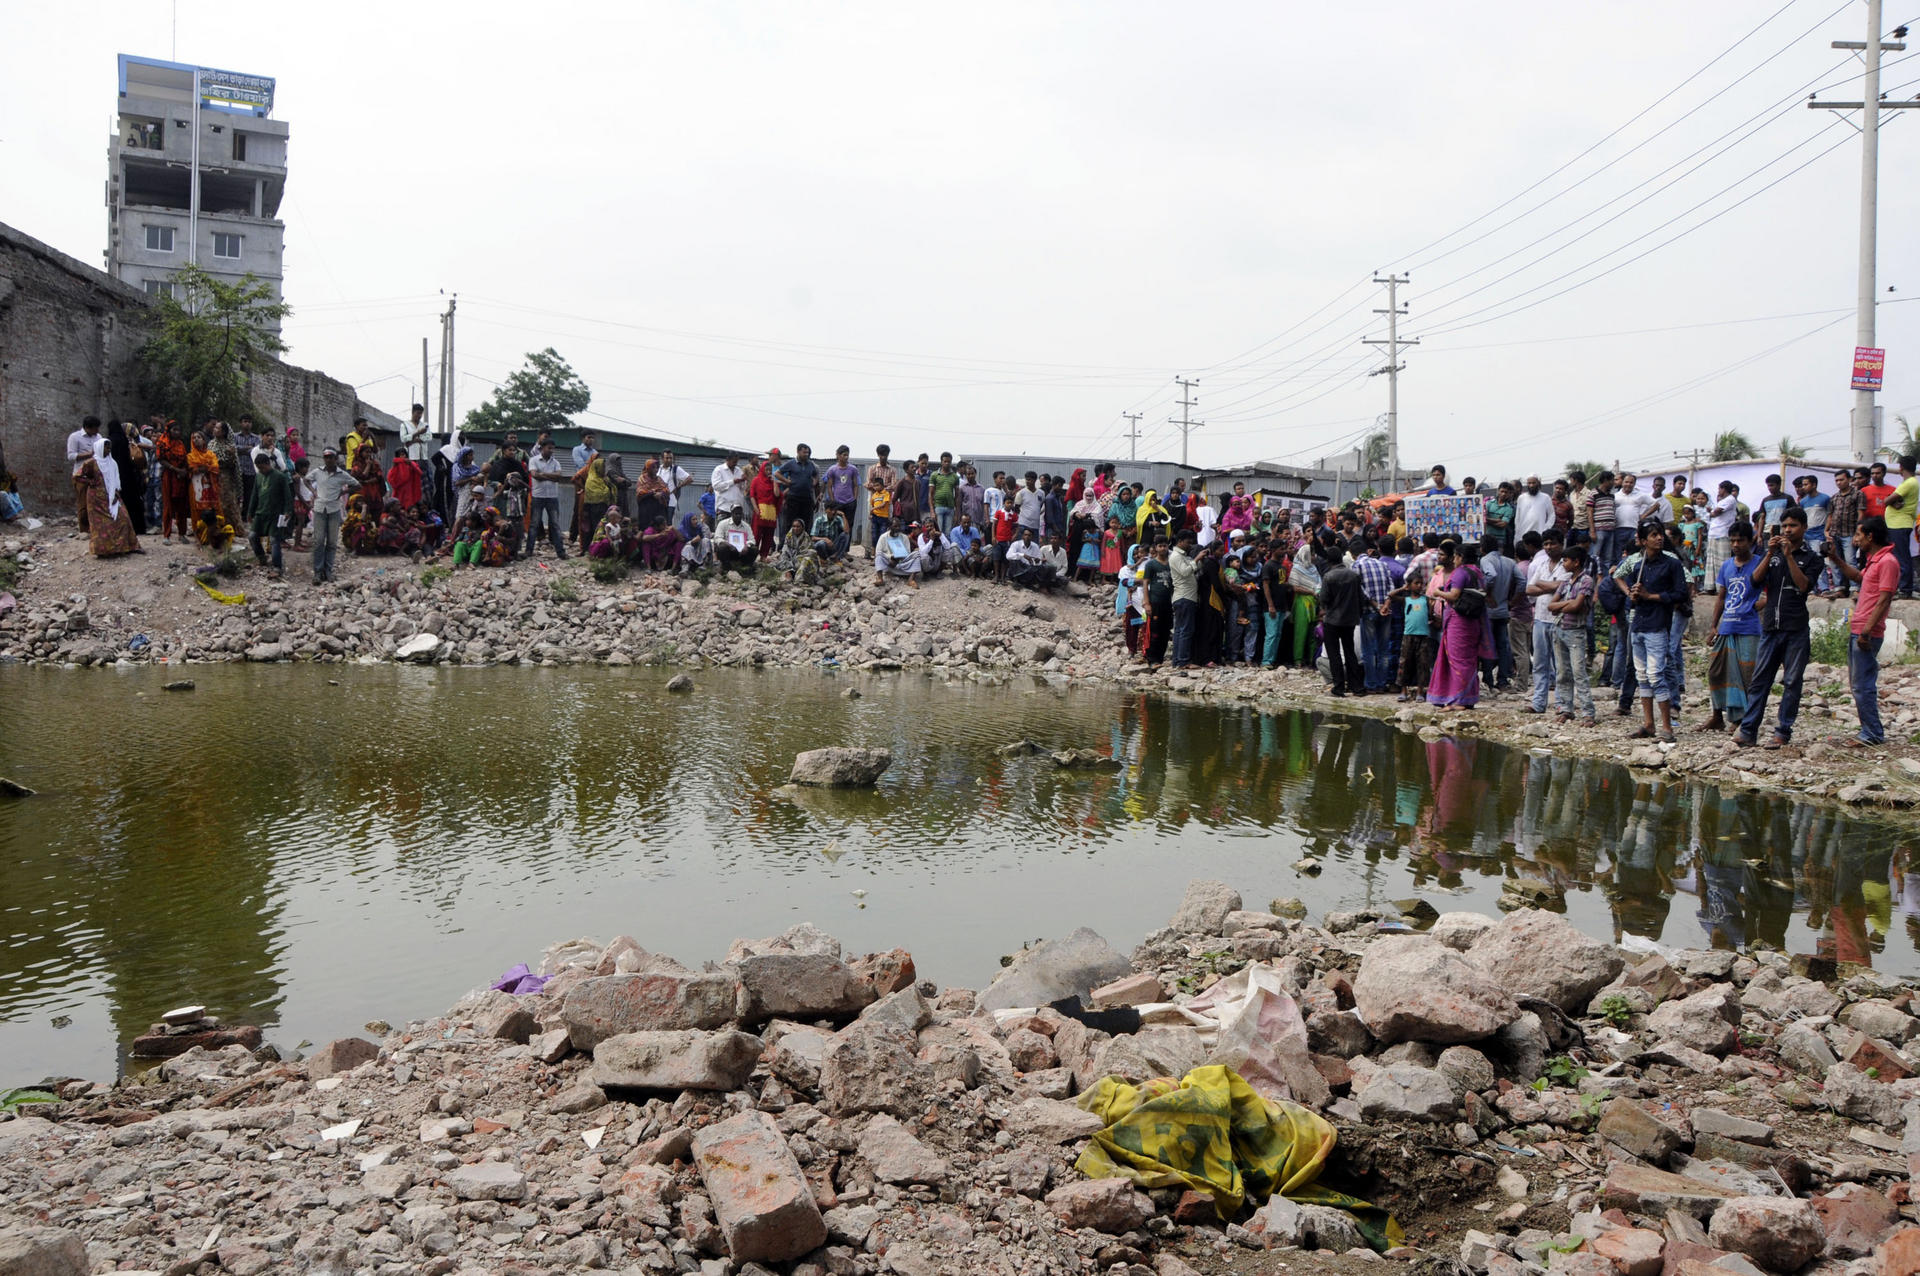 The Rana Plaza tragedy shows the difficulties firms face in monitoring suppliers. Photo: Xinhua